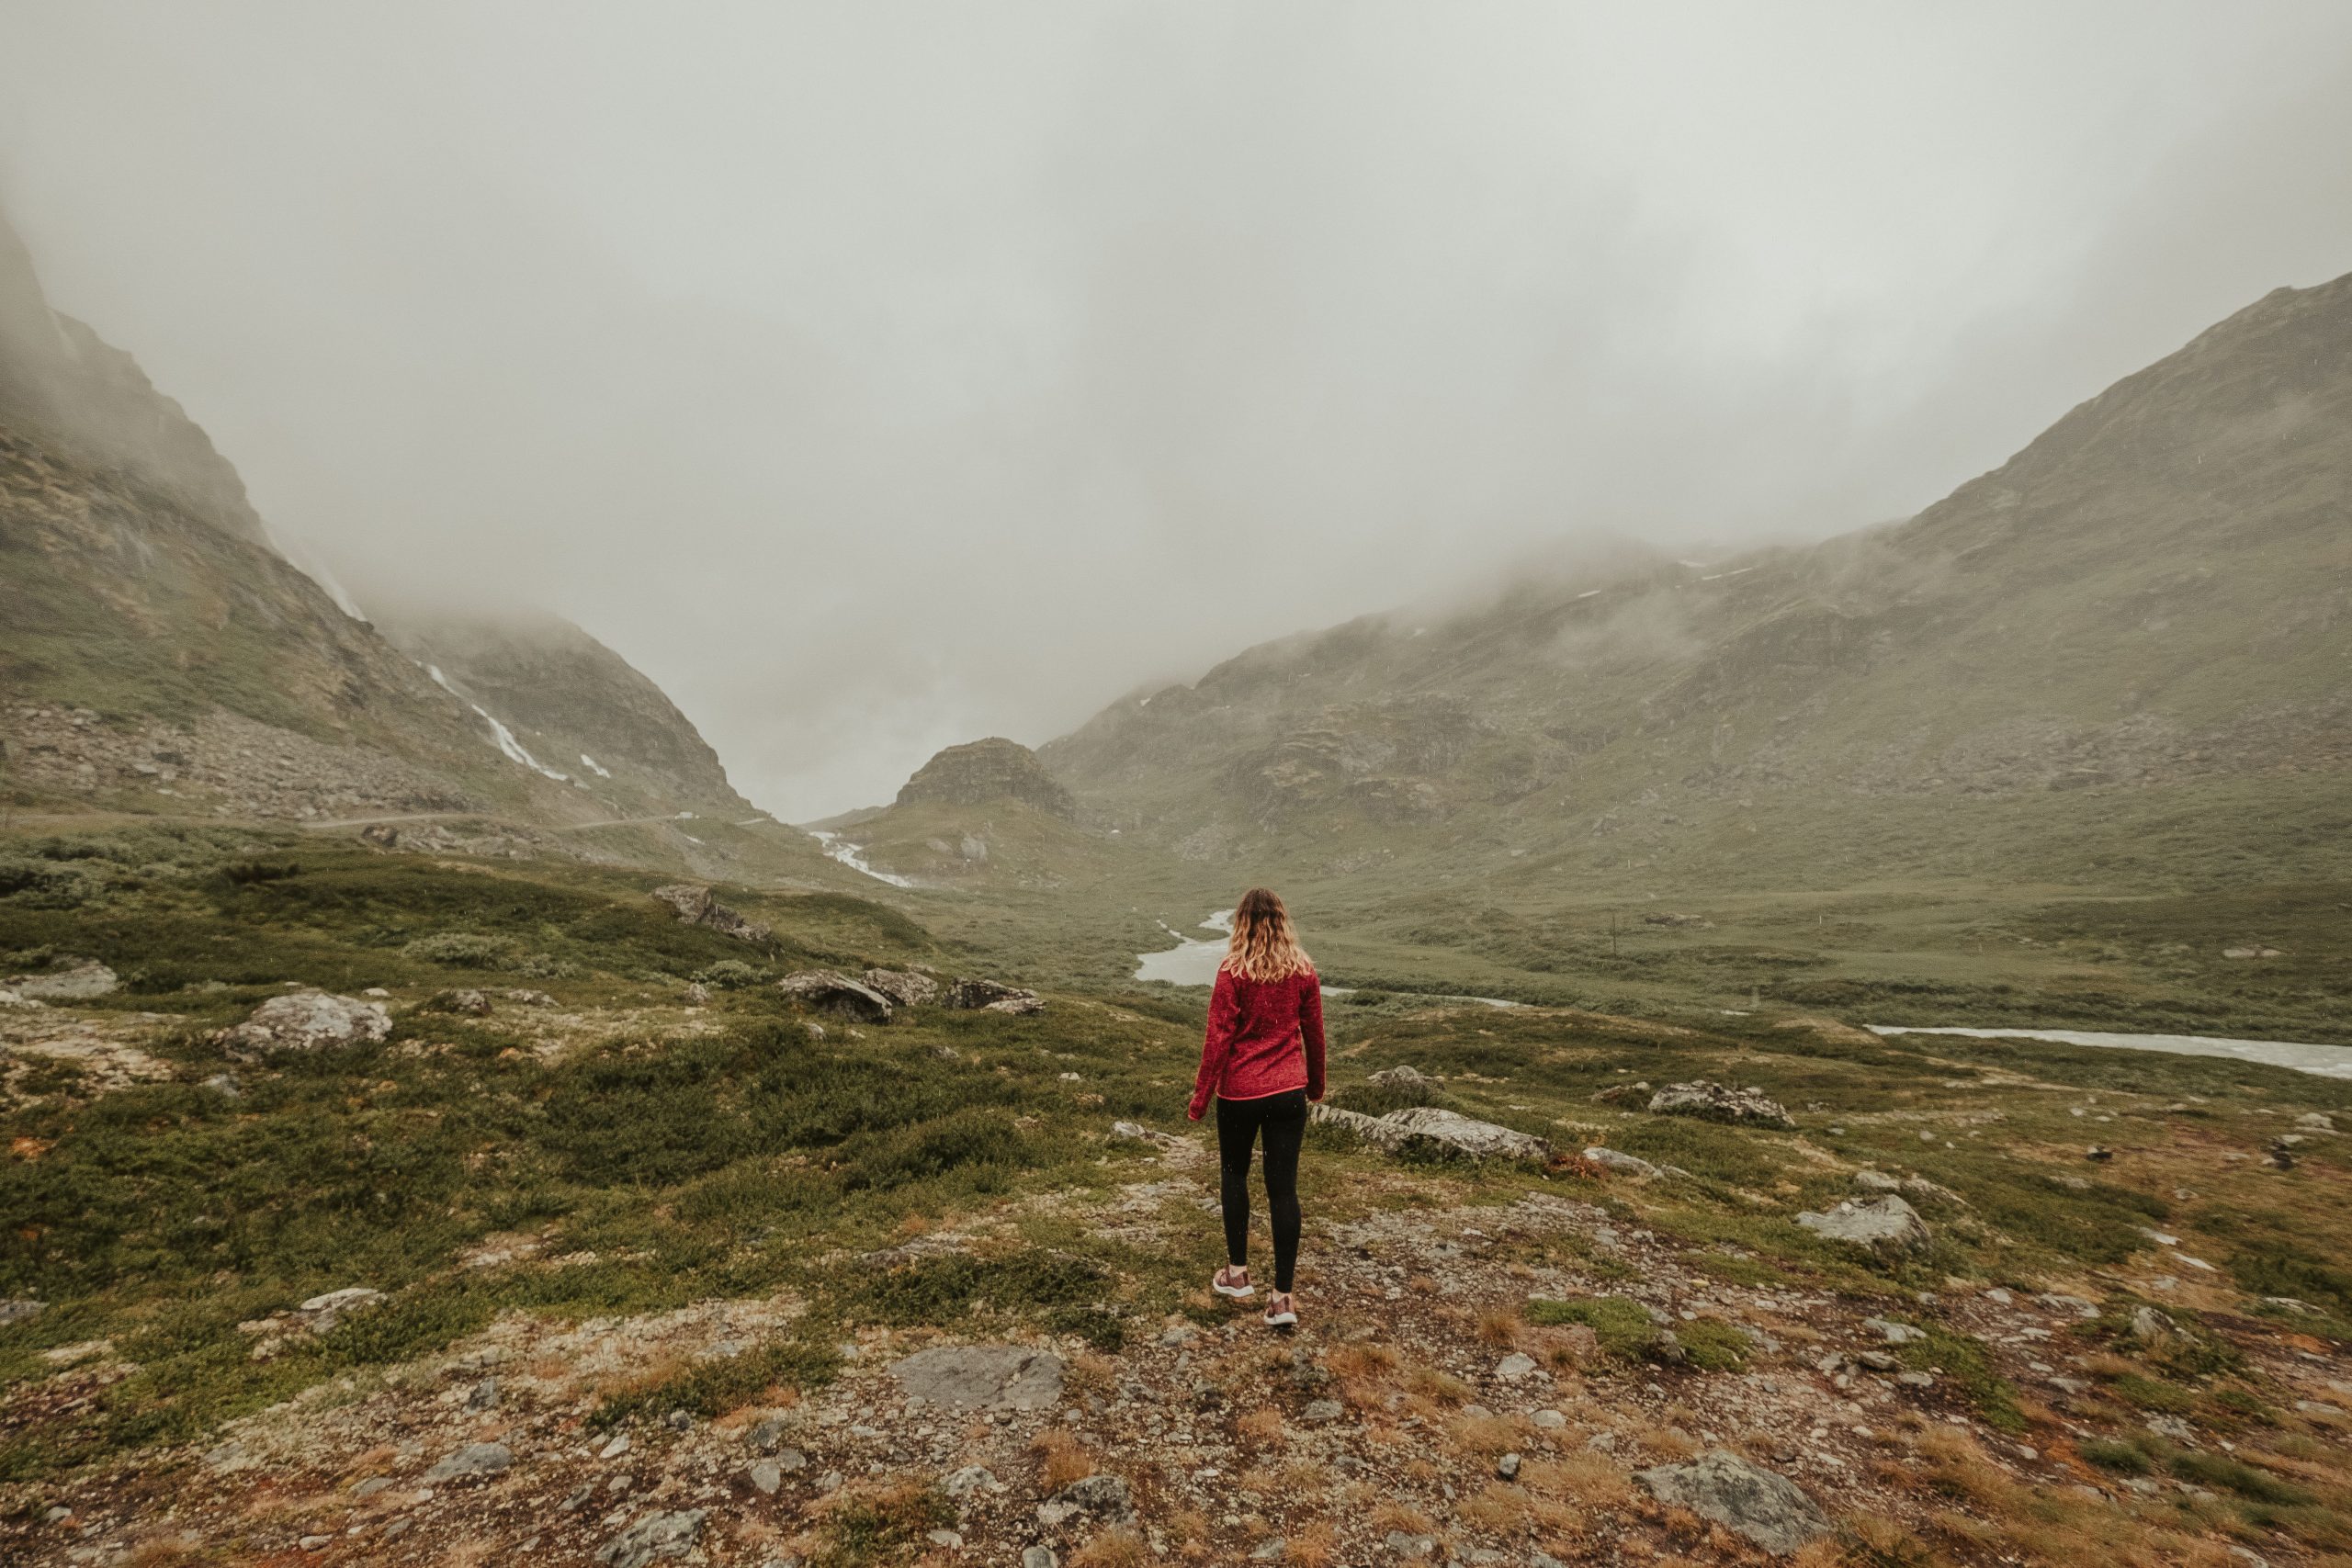 Cory from You Could Travel walking on rugged landscape in Norway